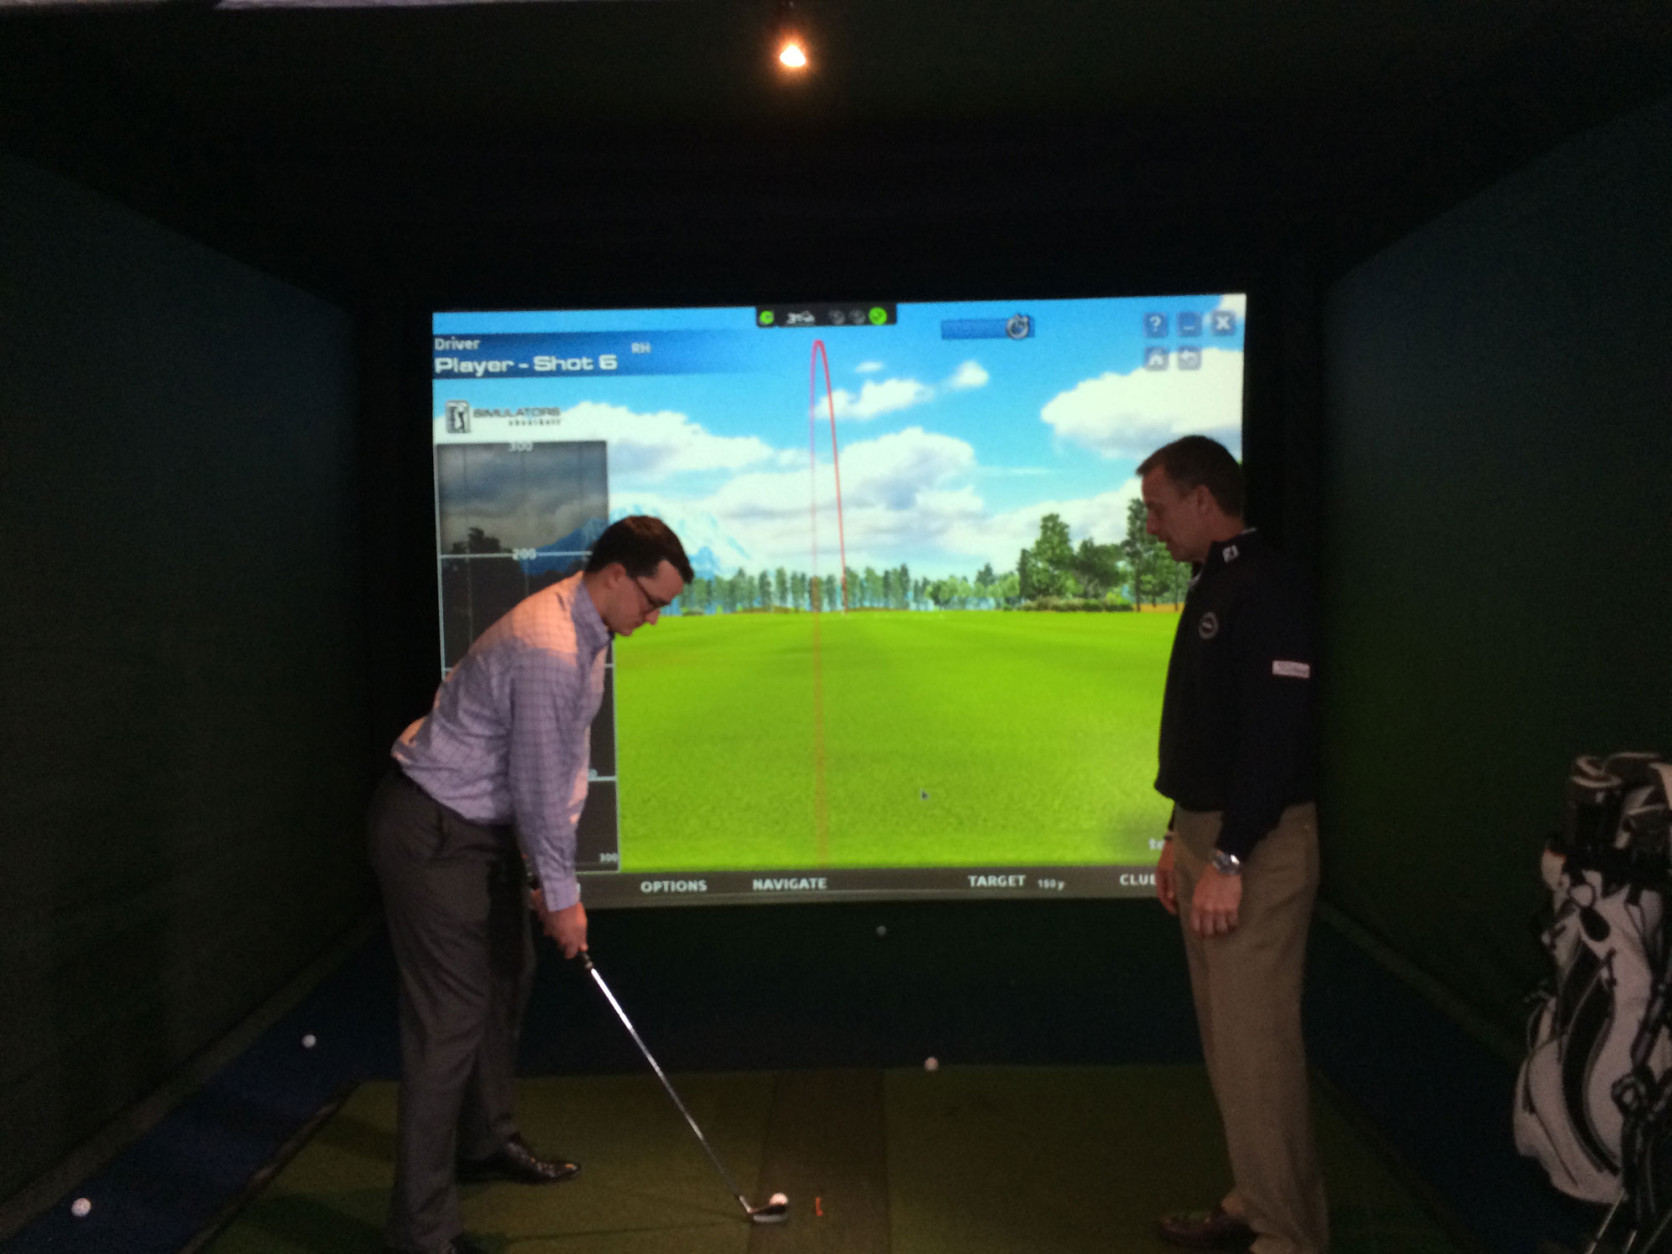 Golf professionals gave tips as players practiced shots on a simulator. (WTOP/Noah Frank)